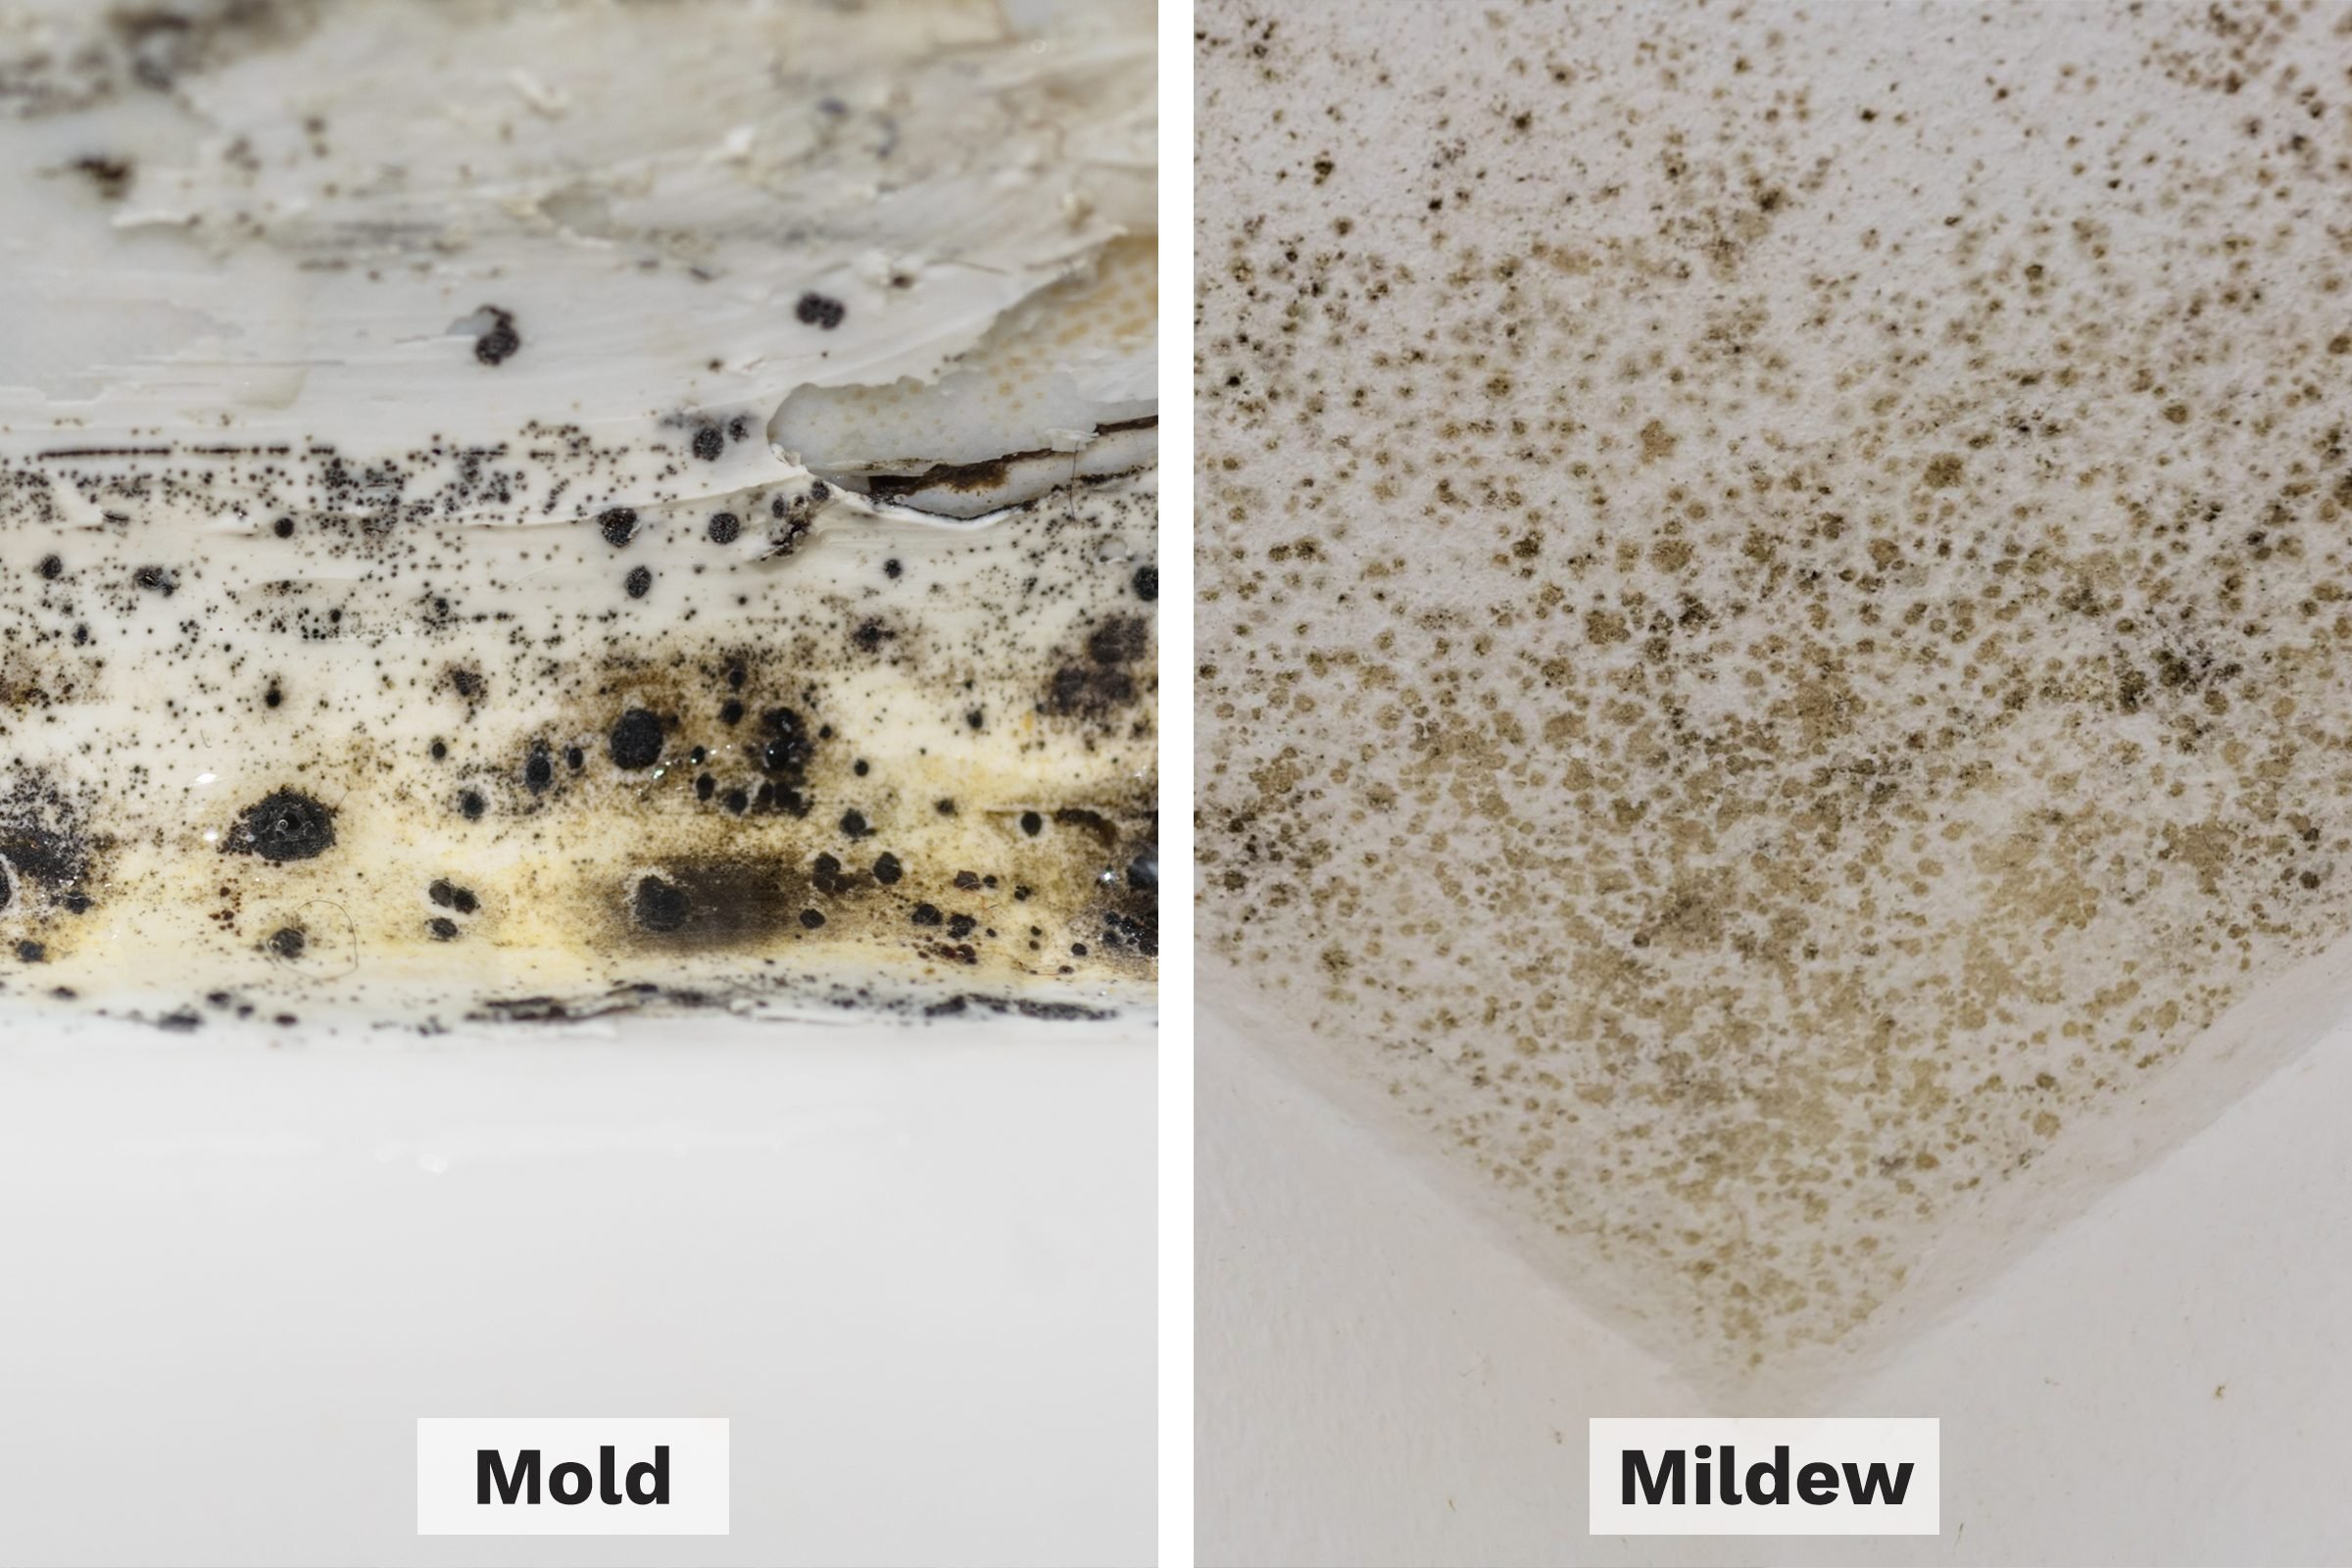 Mildew vs. Mold: What's the Difference?